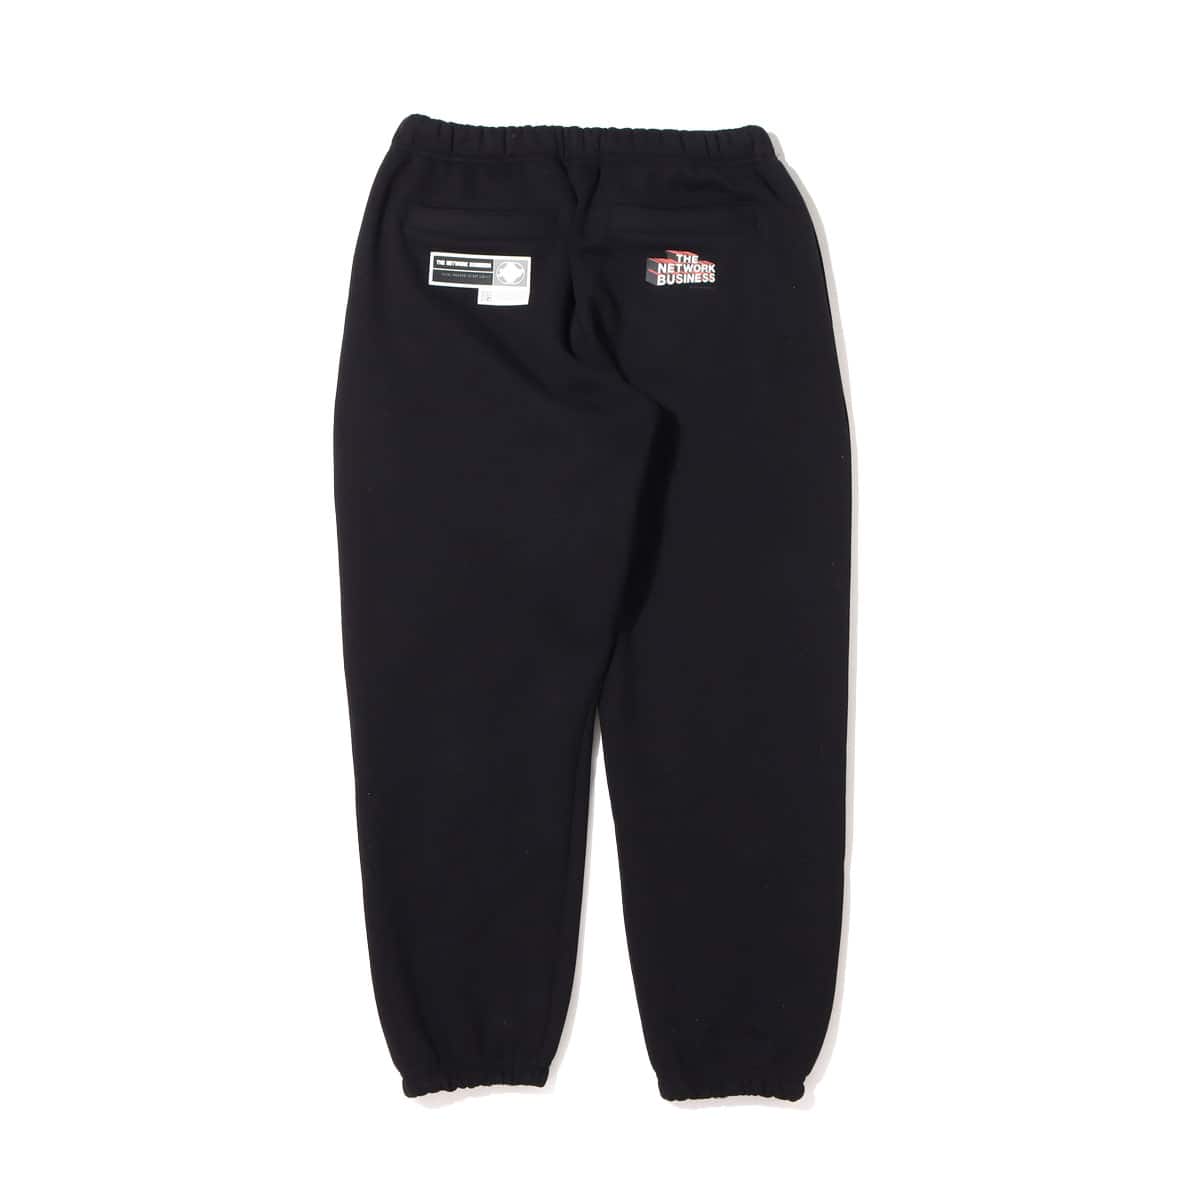 THE NETWORK BUSINESS HEAVY WEIGHT SWEAT PANTS 